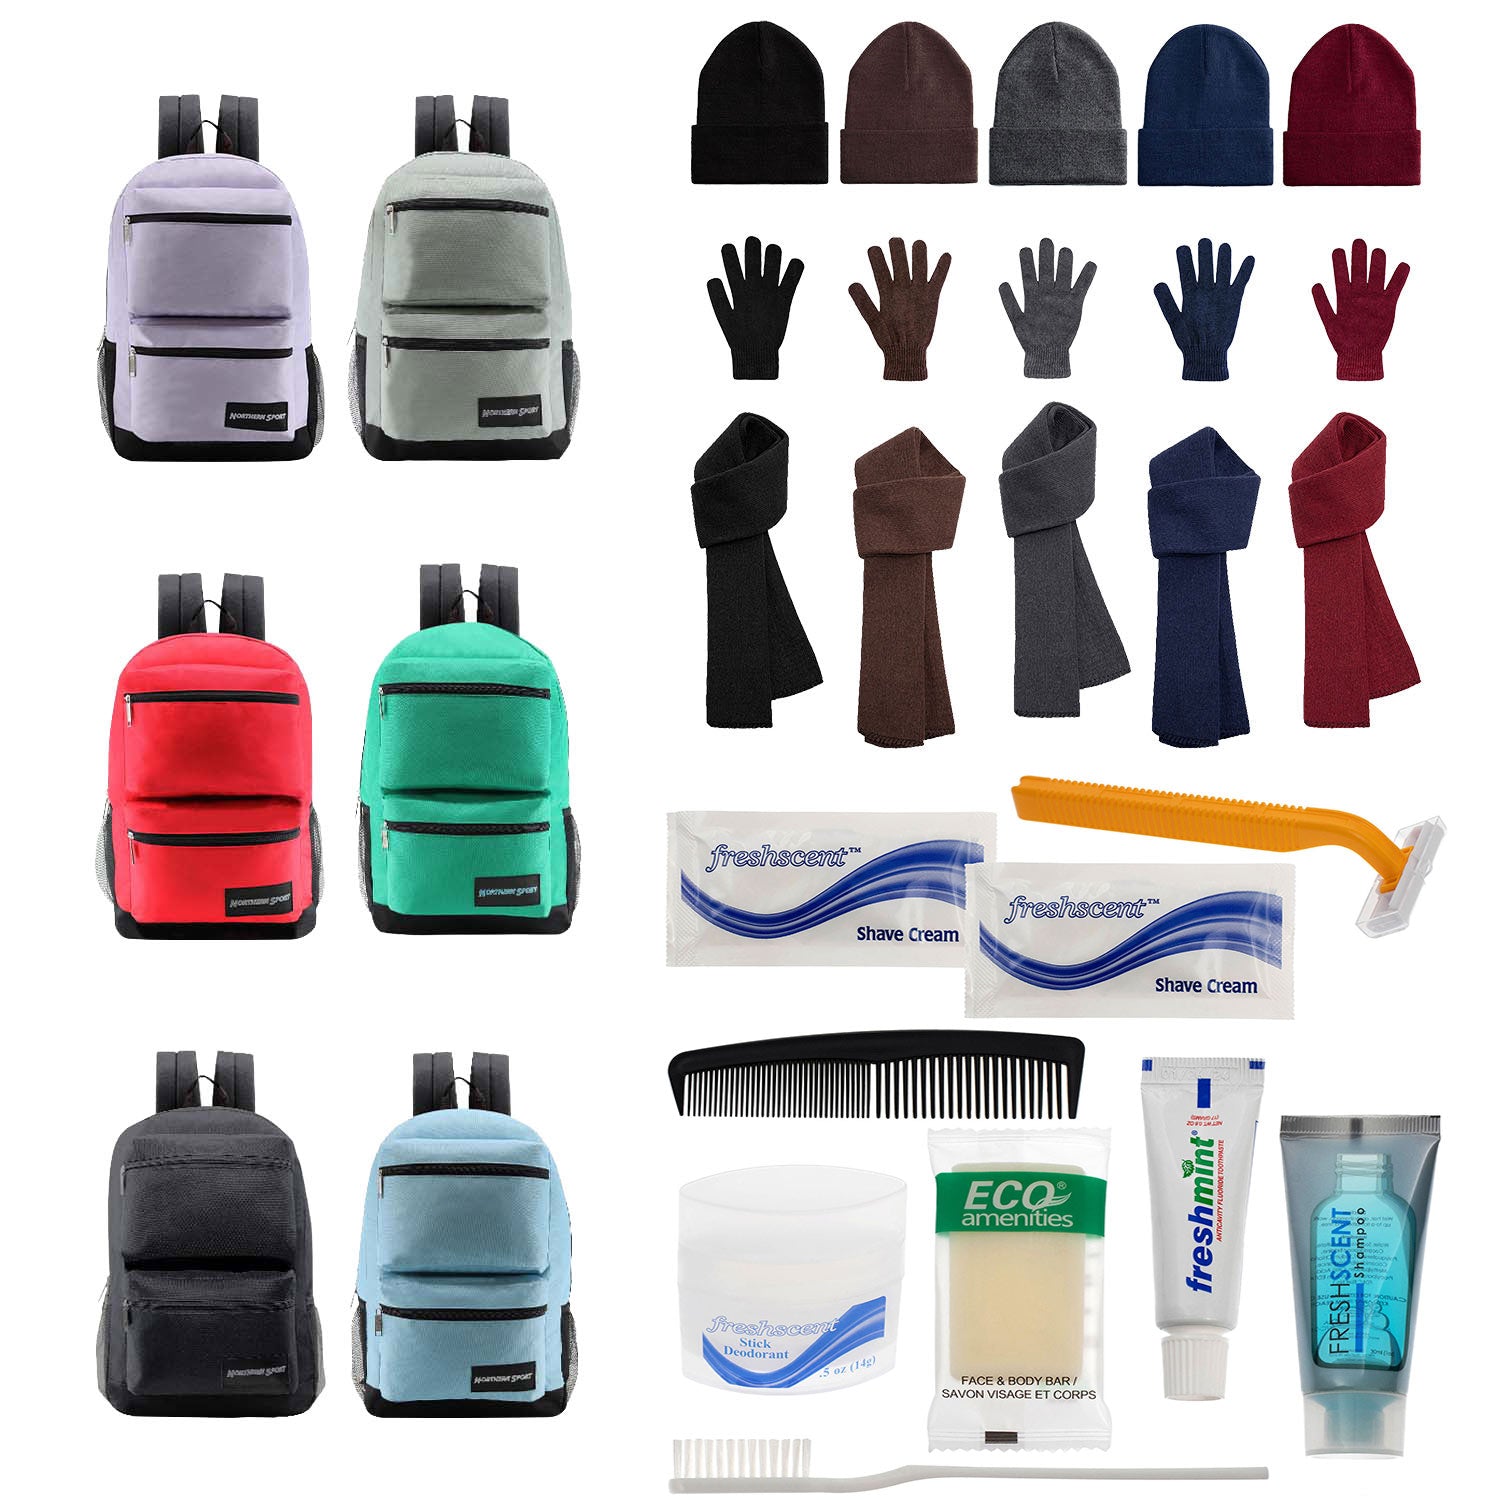 Bulk Case of 12 19" Backpacks and 12 Winter Item Sets and 12 Hygiene Kits - Wholesale Care Package - Emergencies, Homeless, Charity